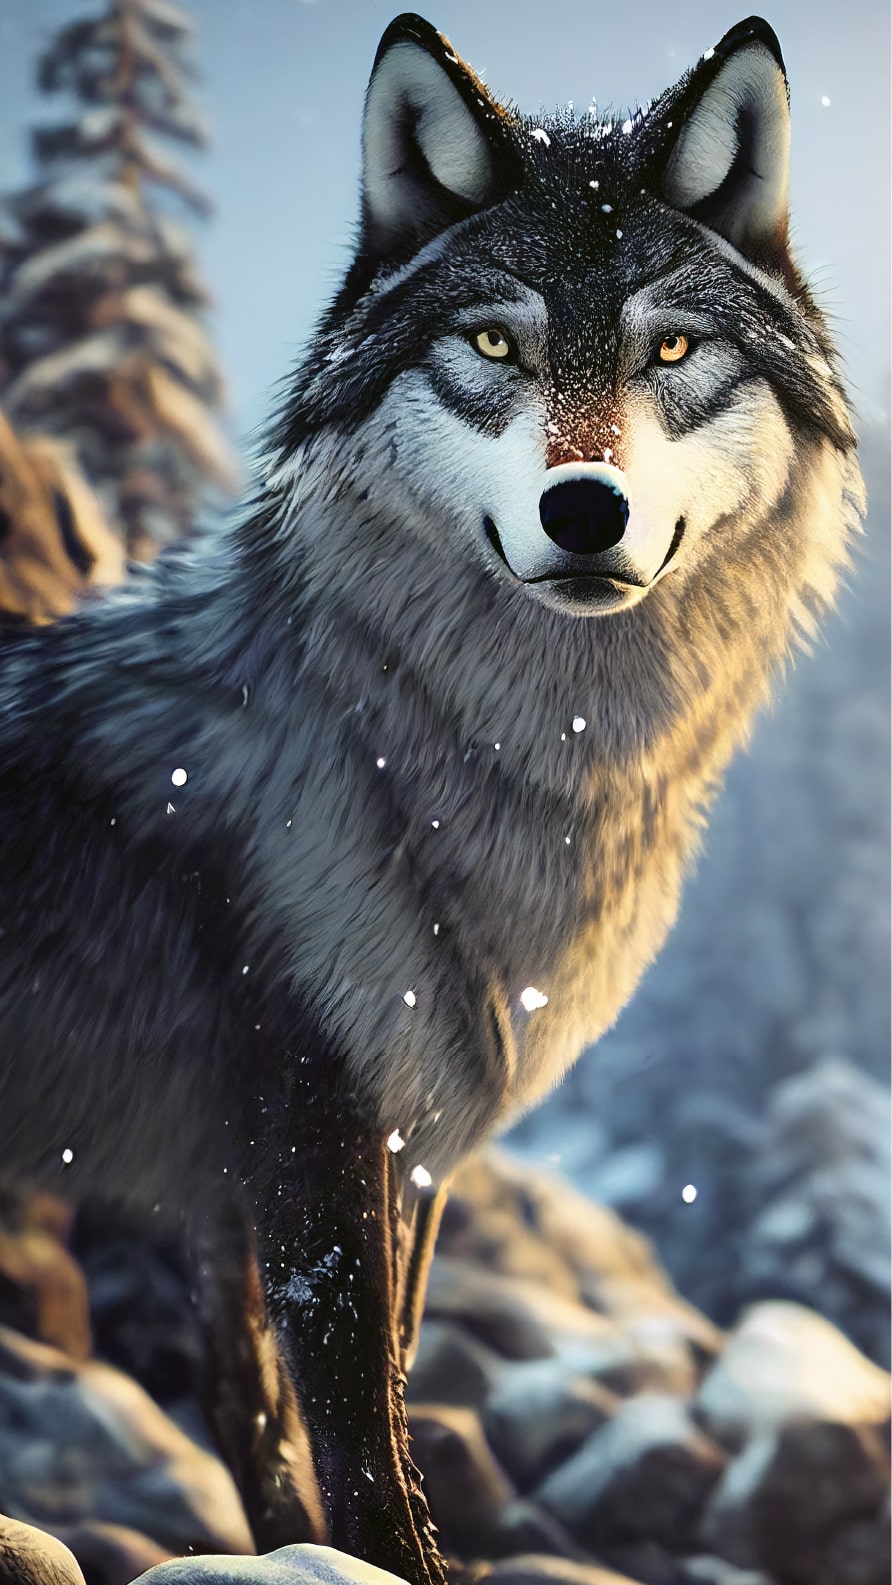 iPhone wallpapers featuring wolves